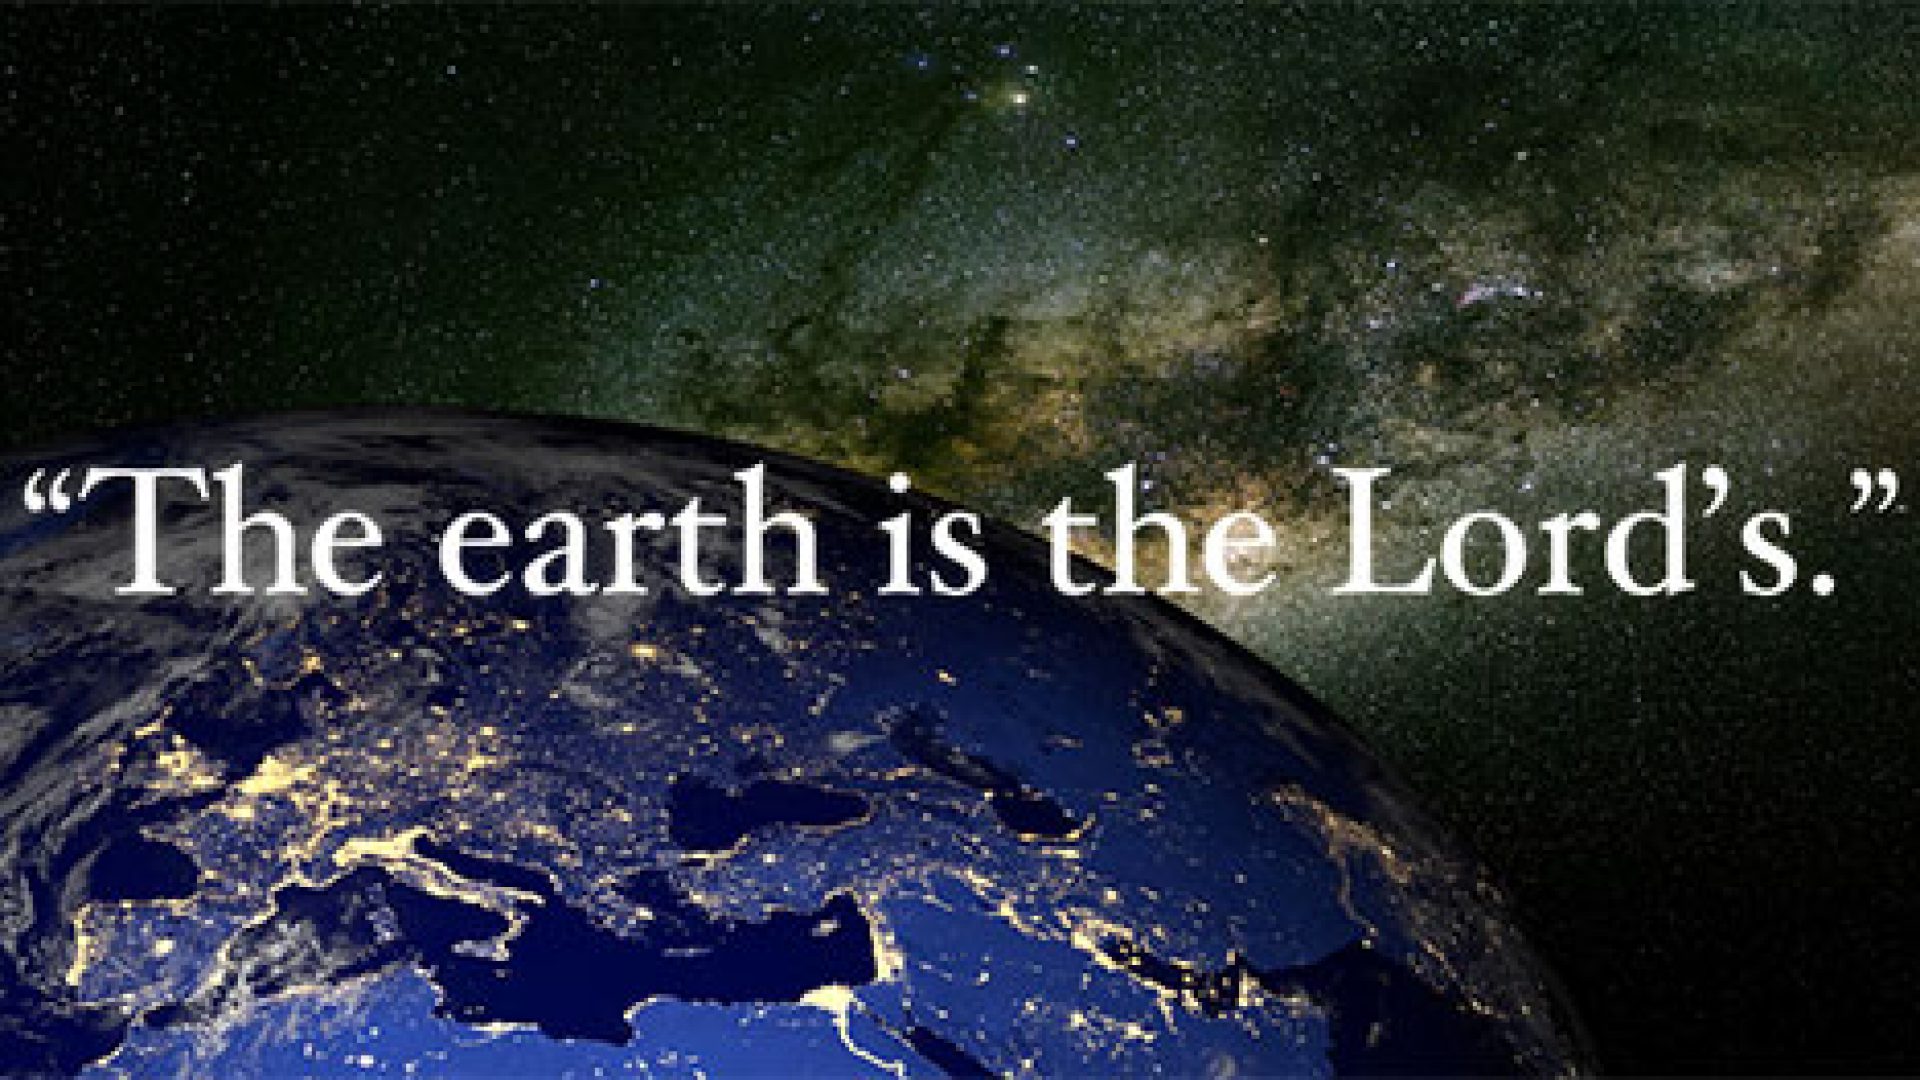 THE EARTH IS THE LORD’S